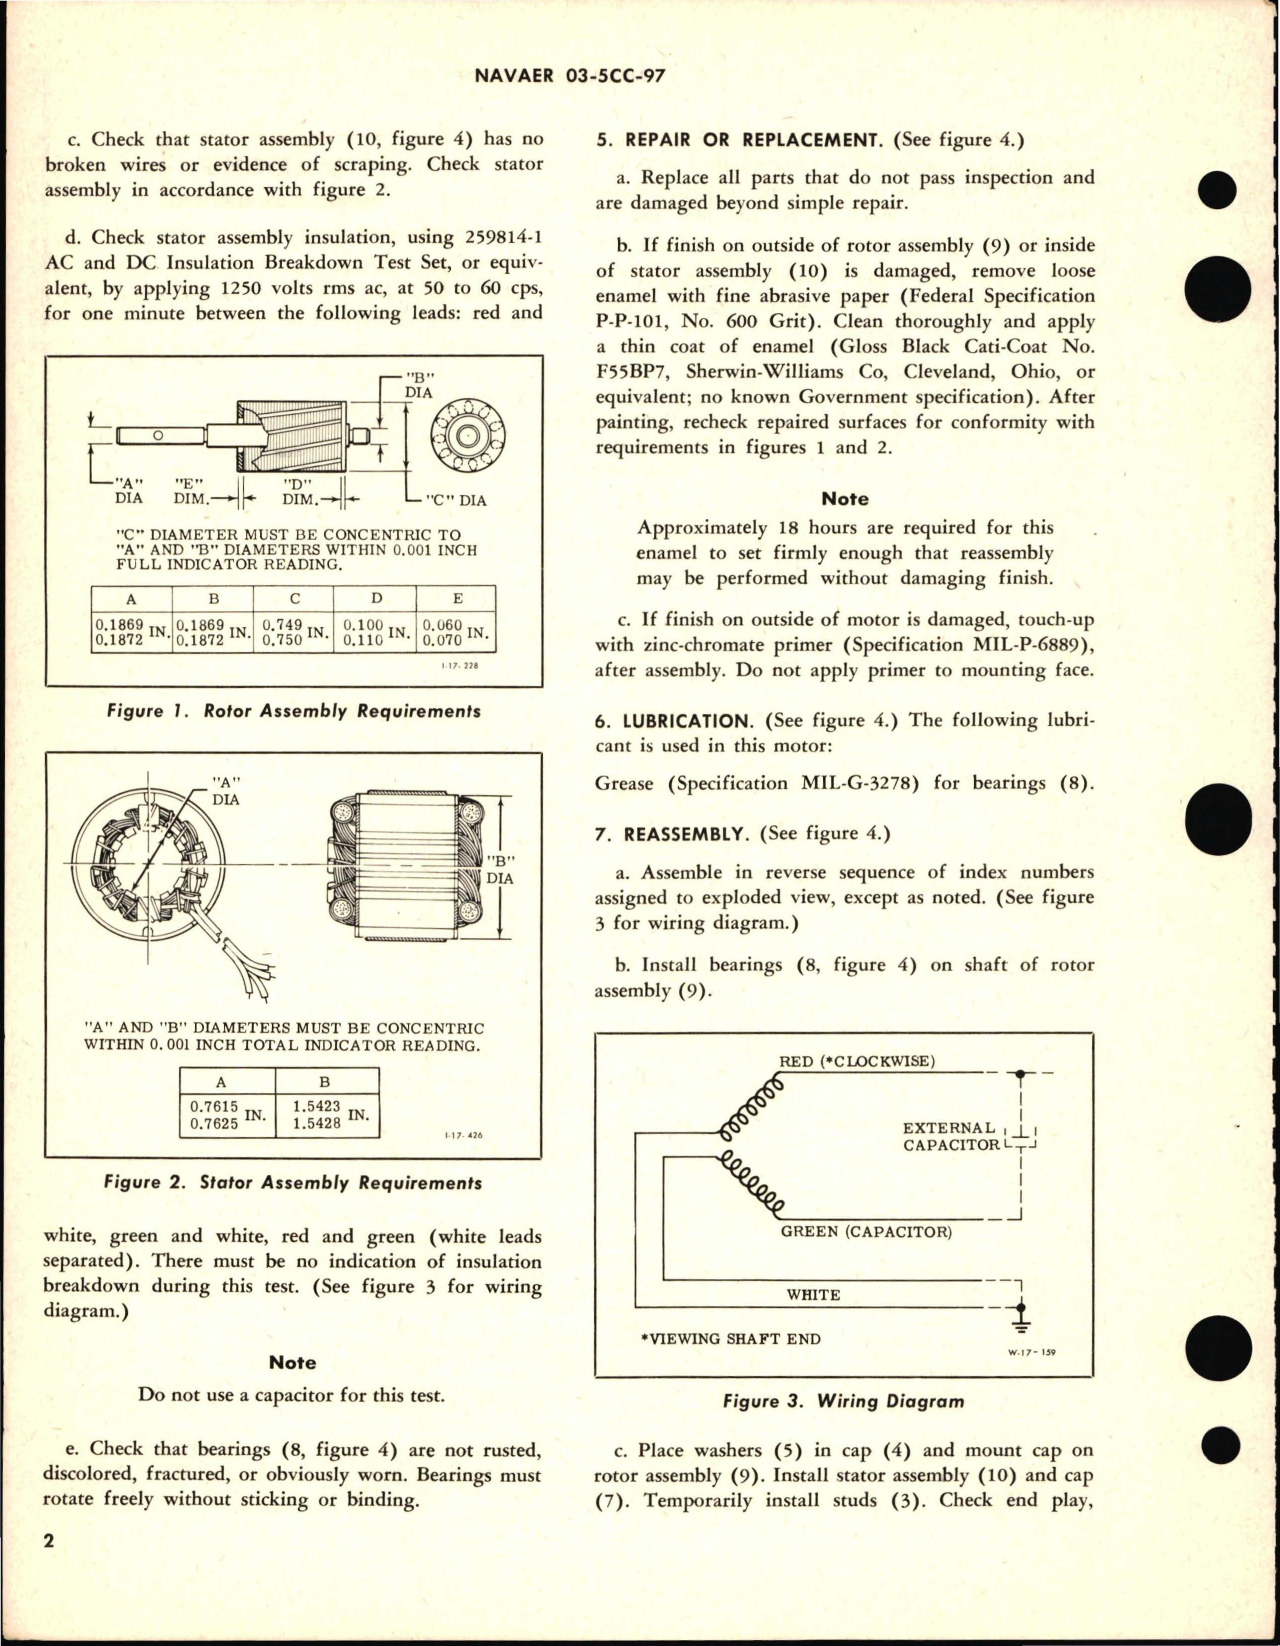 Sample page 2 from AirCorps Library document: Overhaul Instructions with Parts Breakdown for Induction Motor Part 27656 